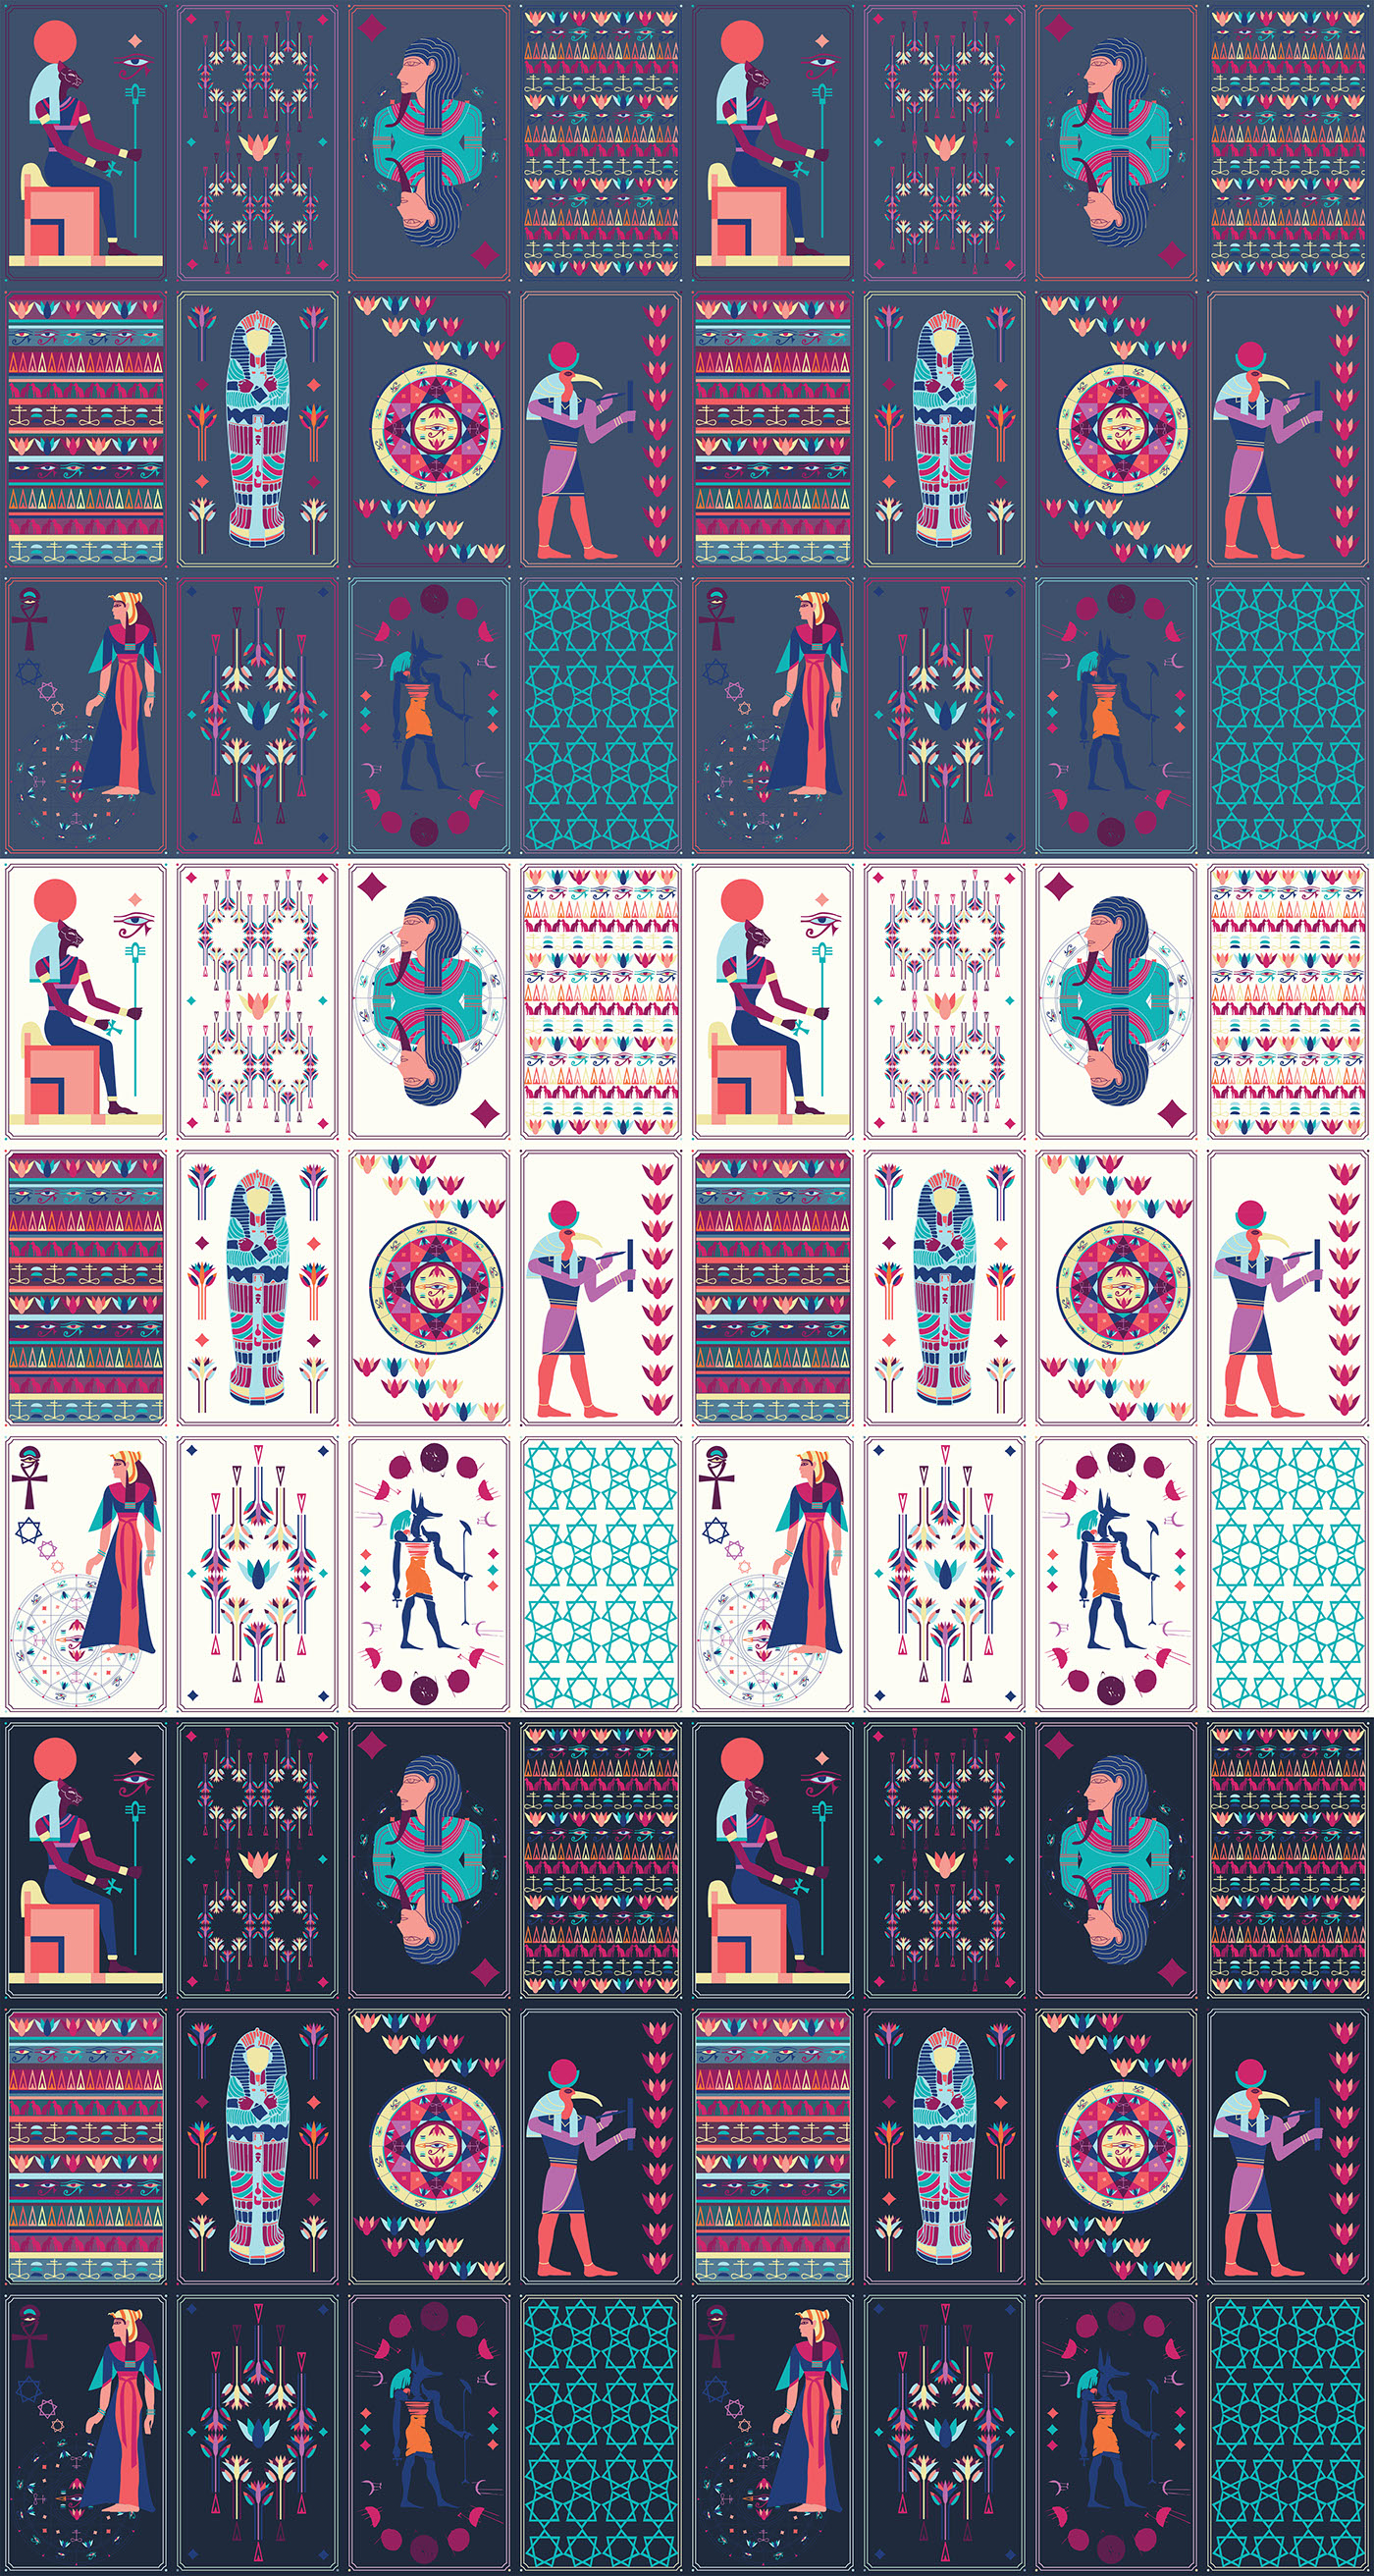 surfacedesign textiledesign fabric editorial photoshop Illustrator egyptian inspired vector PrintandPattern printmaking prints repeats characters